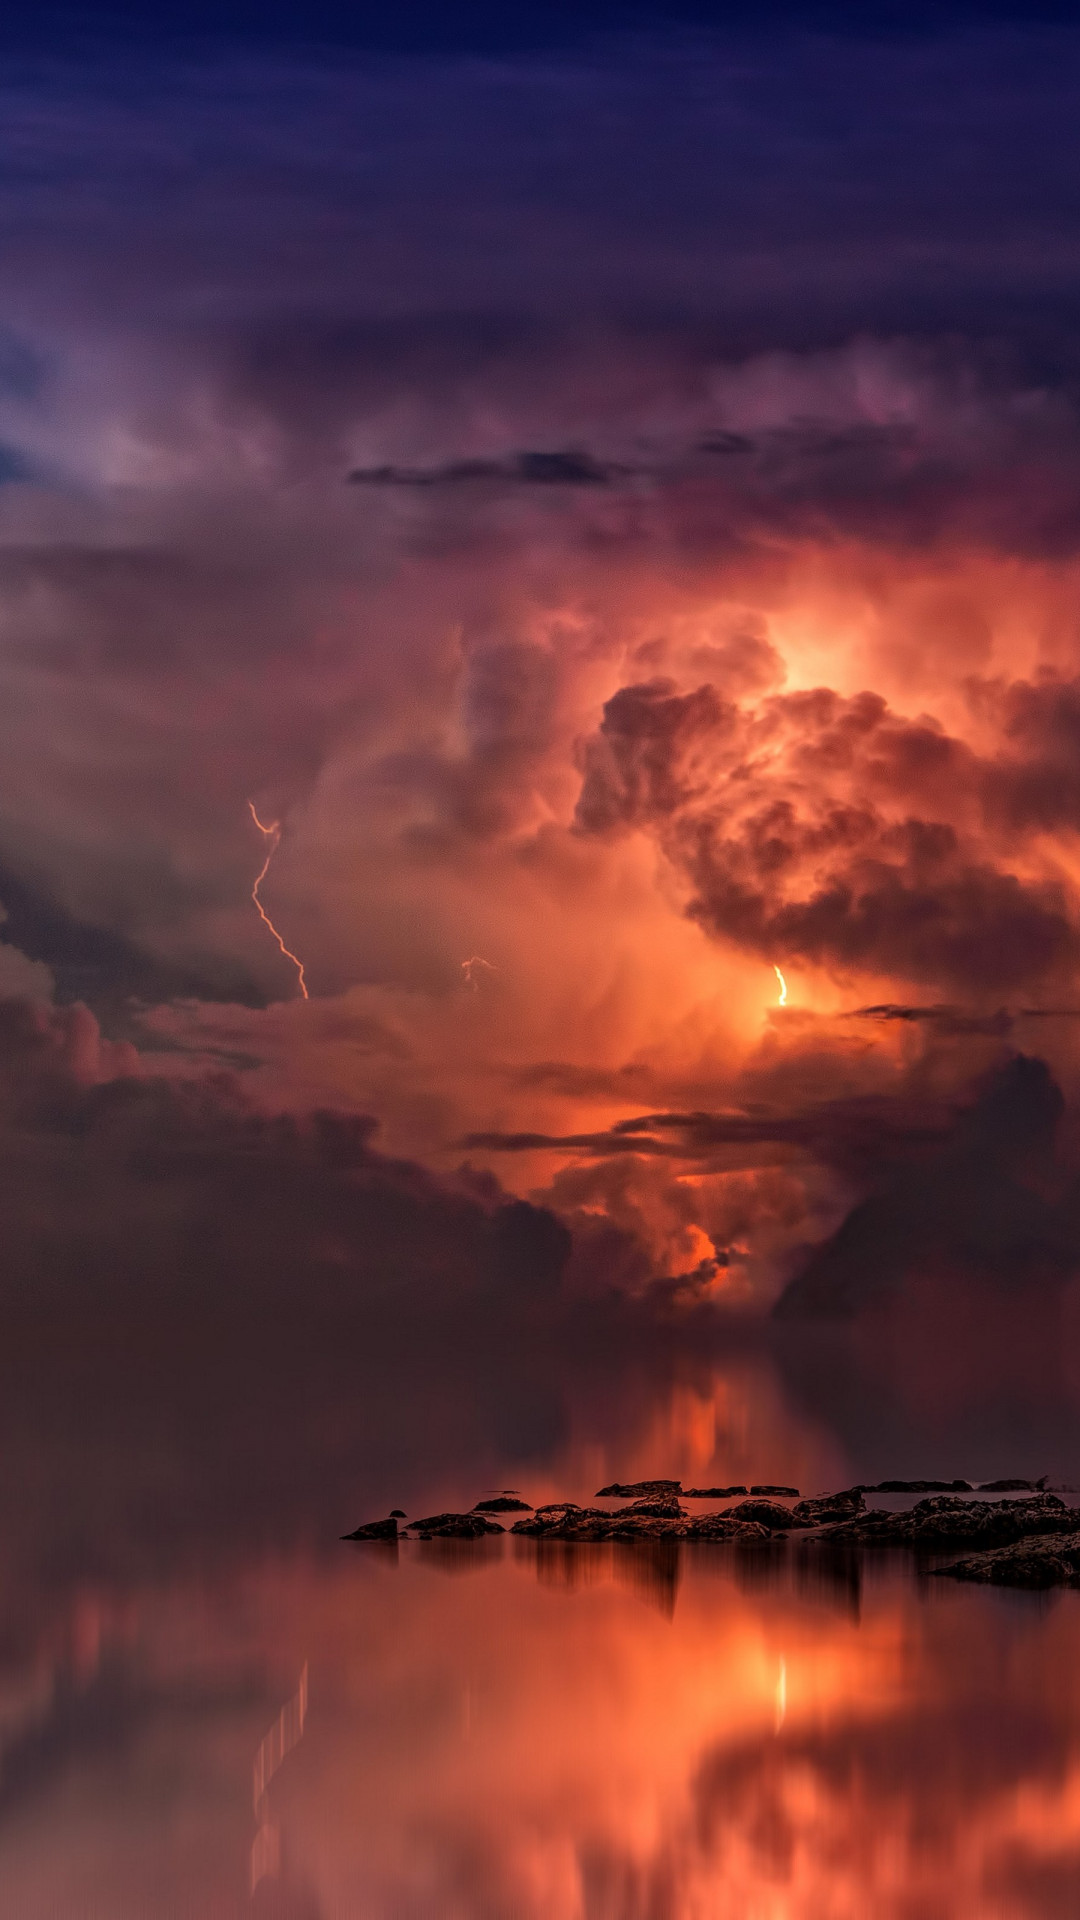 Lightning and thunderstorm in the sky wallpaper 1080x1920